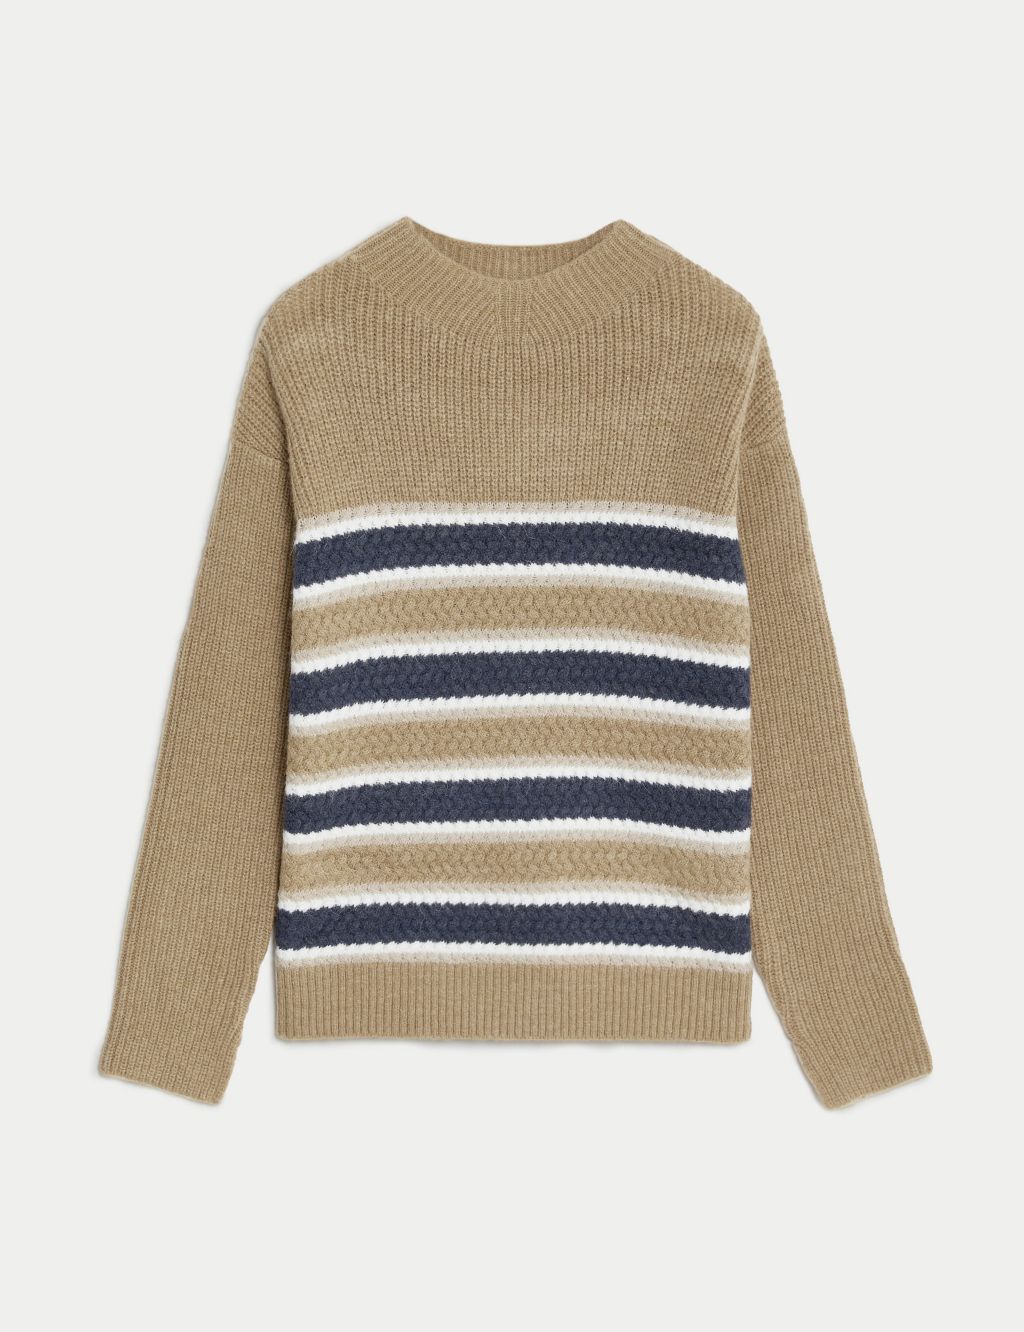 Striped Funnel Neck Jumper with Wool image 2